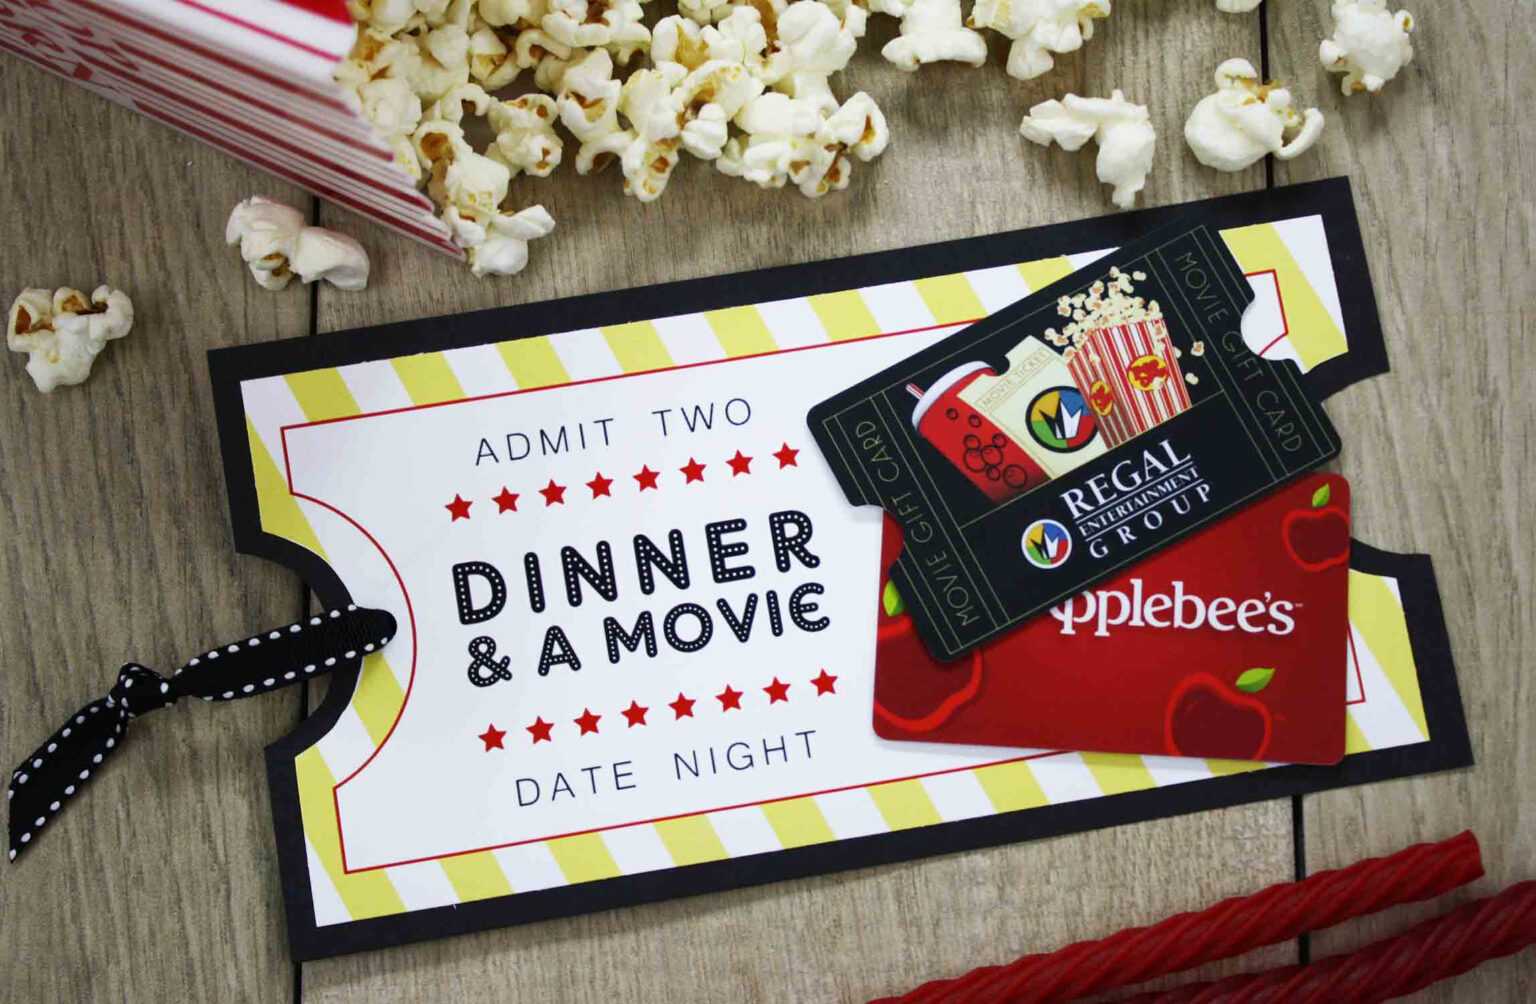 Date Night Gift Certificate Templates